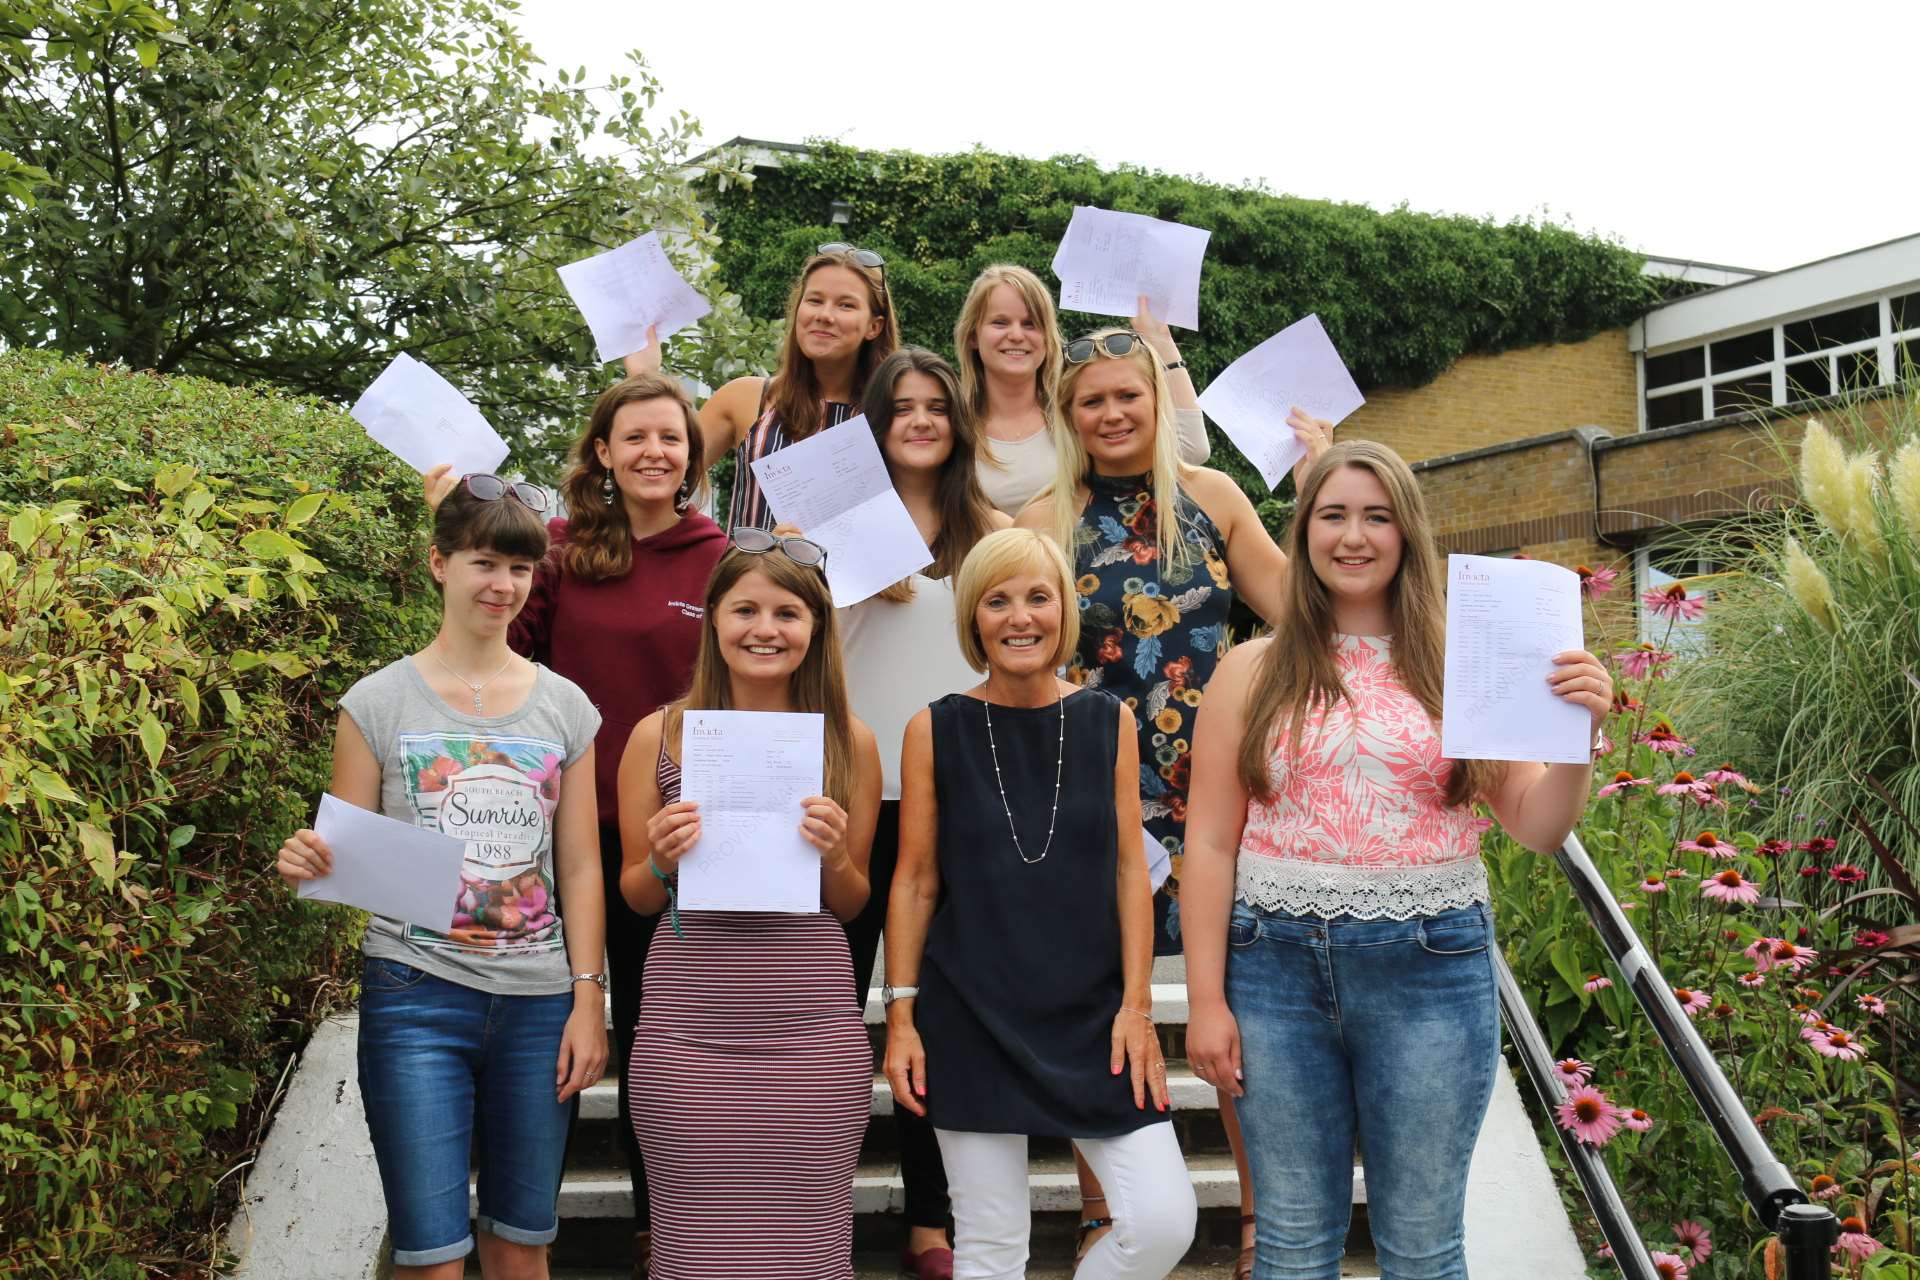 Students at Invicta Grammar School celebrate their results